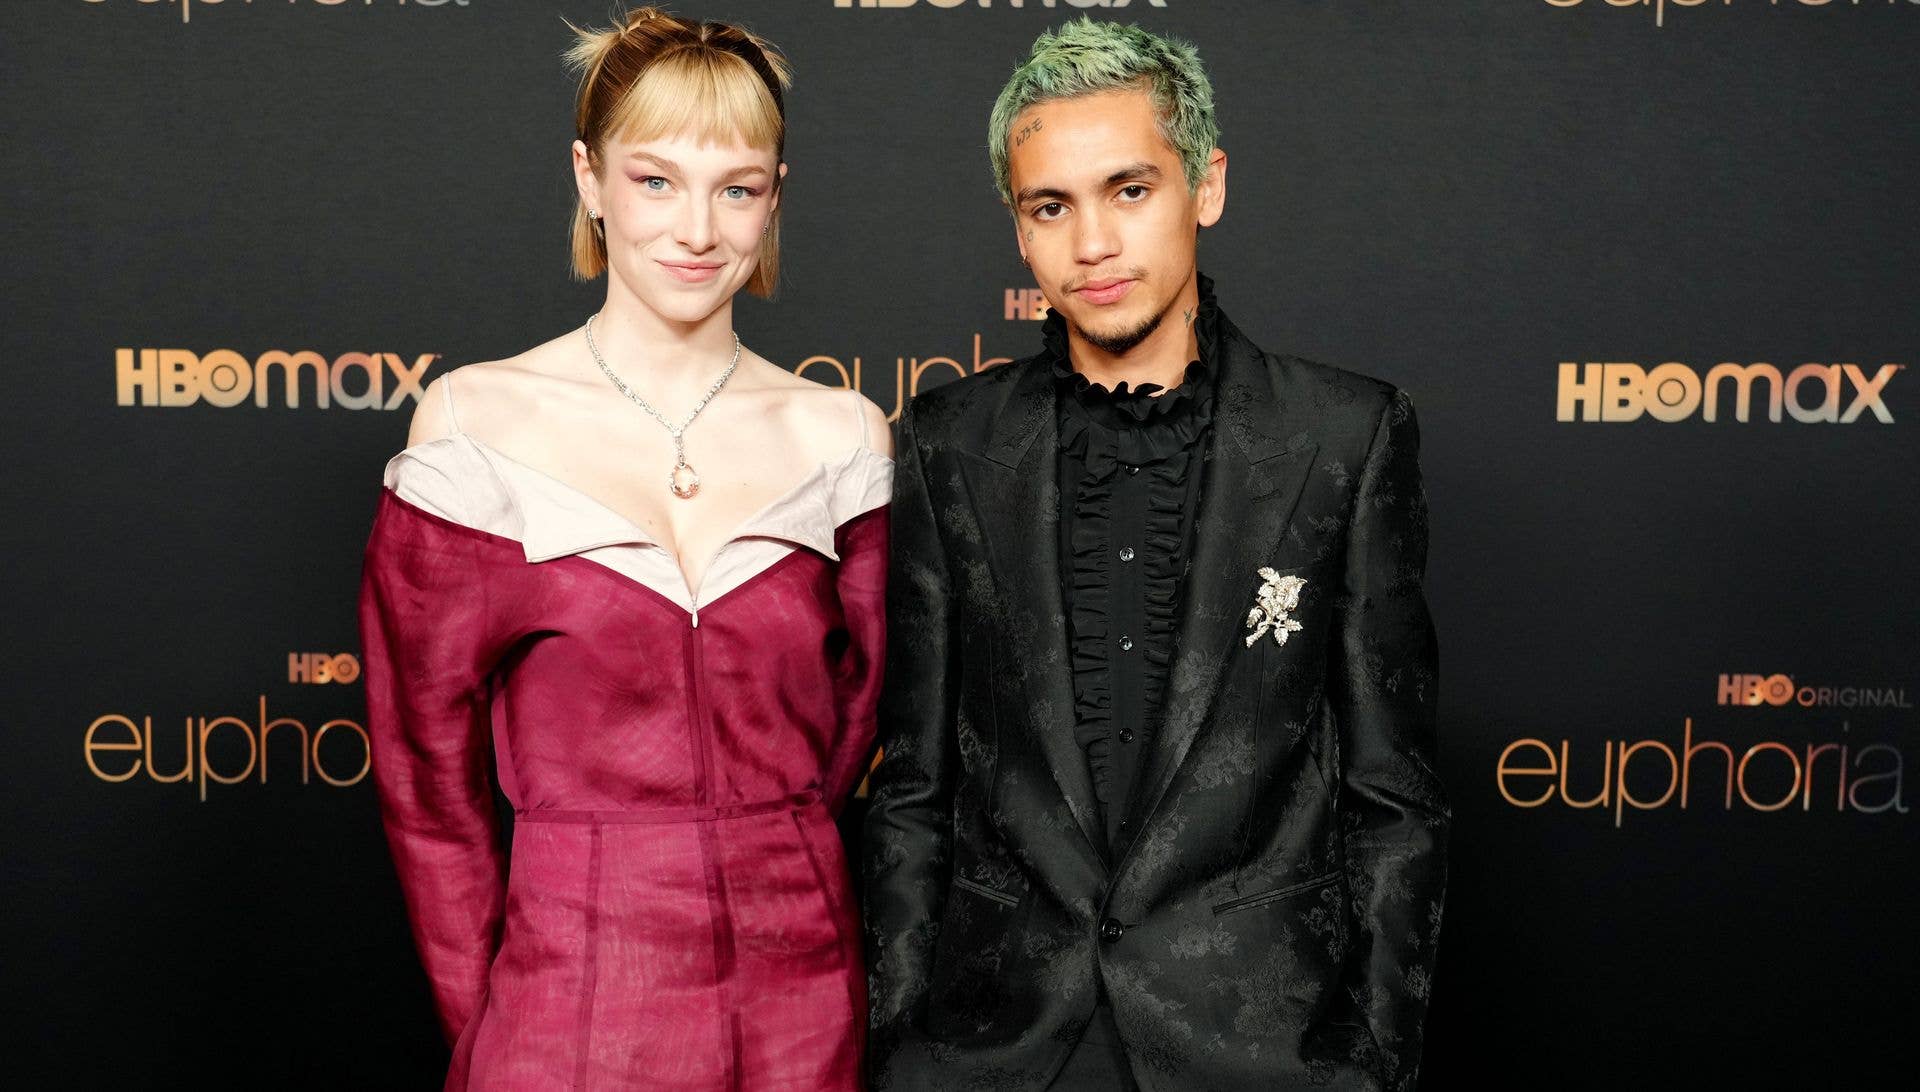 Hunter Schafer and Dominic Fike attend HBO's "Euphoria" Season 2 Photo Call